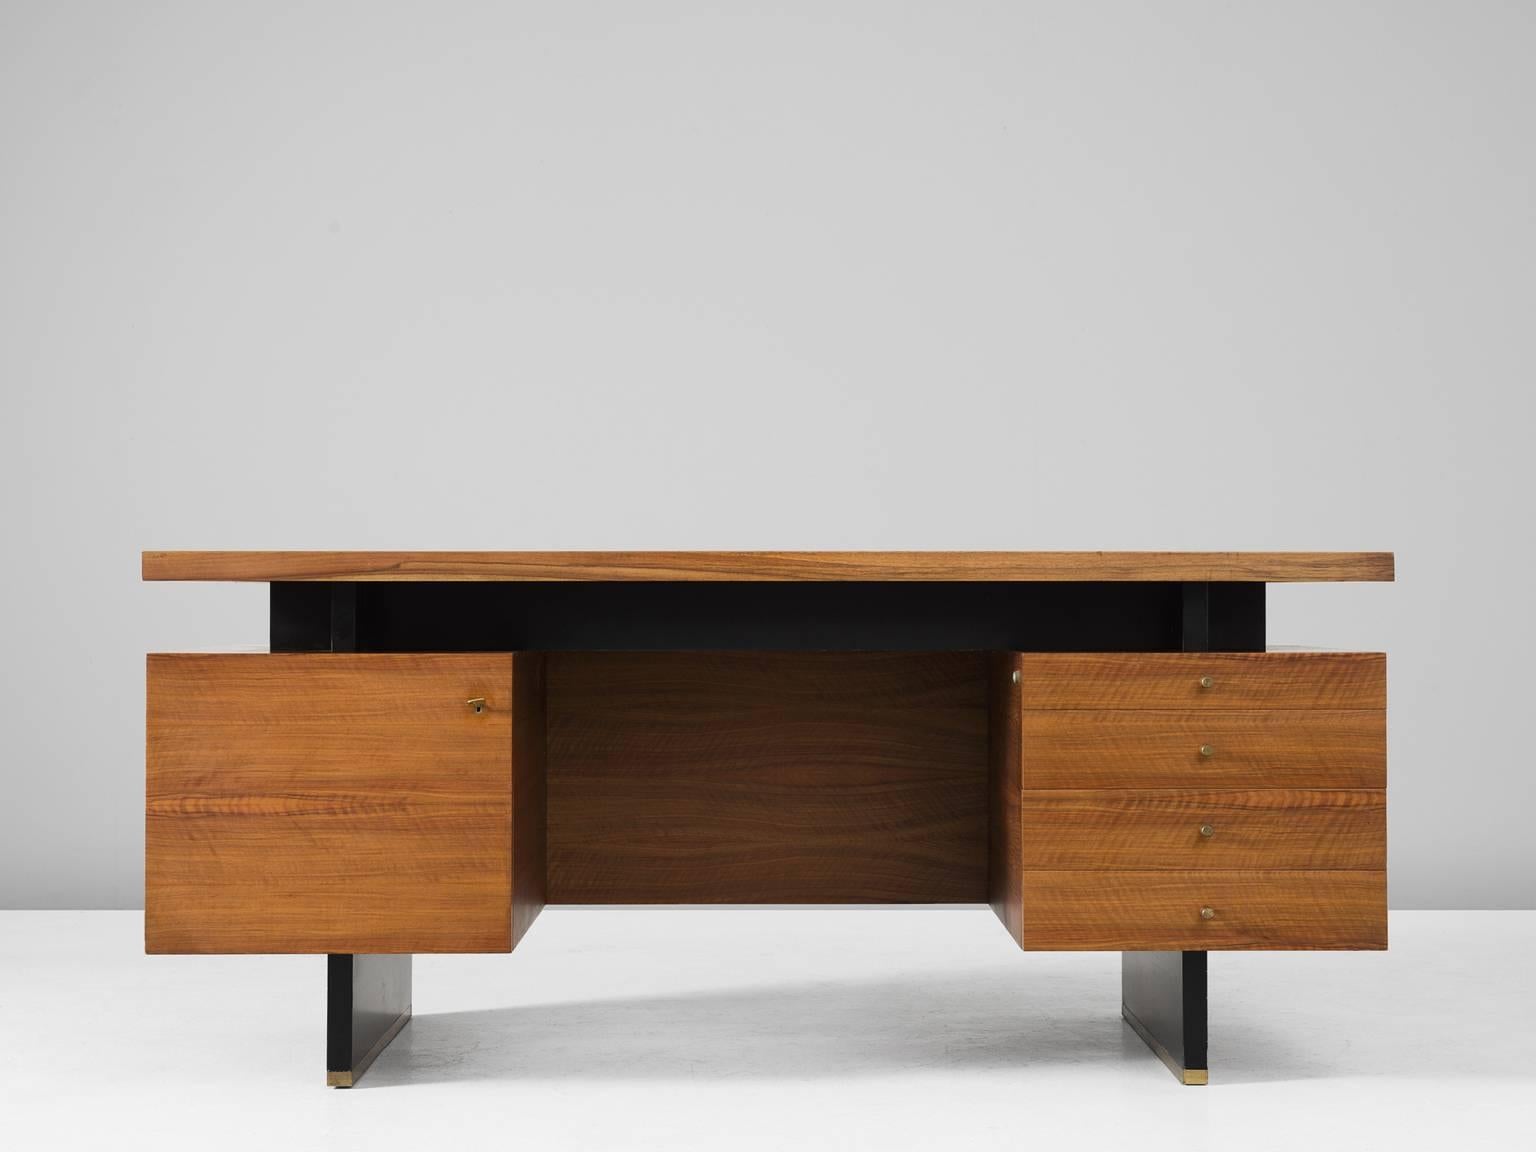 Desk, in walnut, brass and oak, by Jos de Mey for Van den Berghe-Pouvers, Belgium, circa 1958.

Rare desk by Belgian designer Jos de Mey. This desk has a great symmetrical and architectural expression. The base consist of two parallel black legs